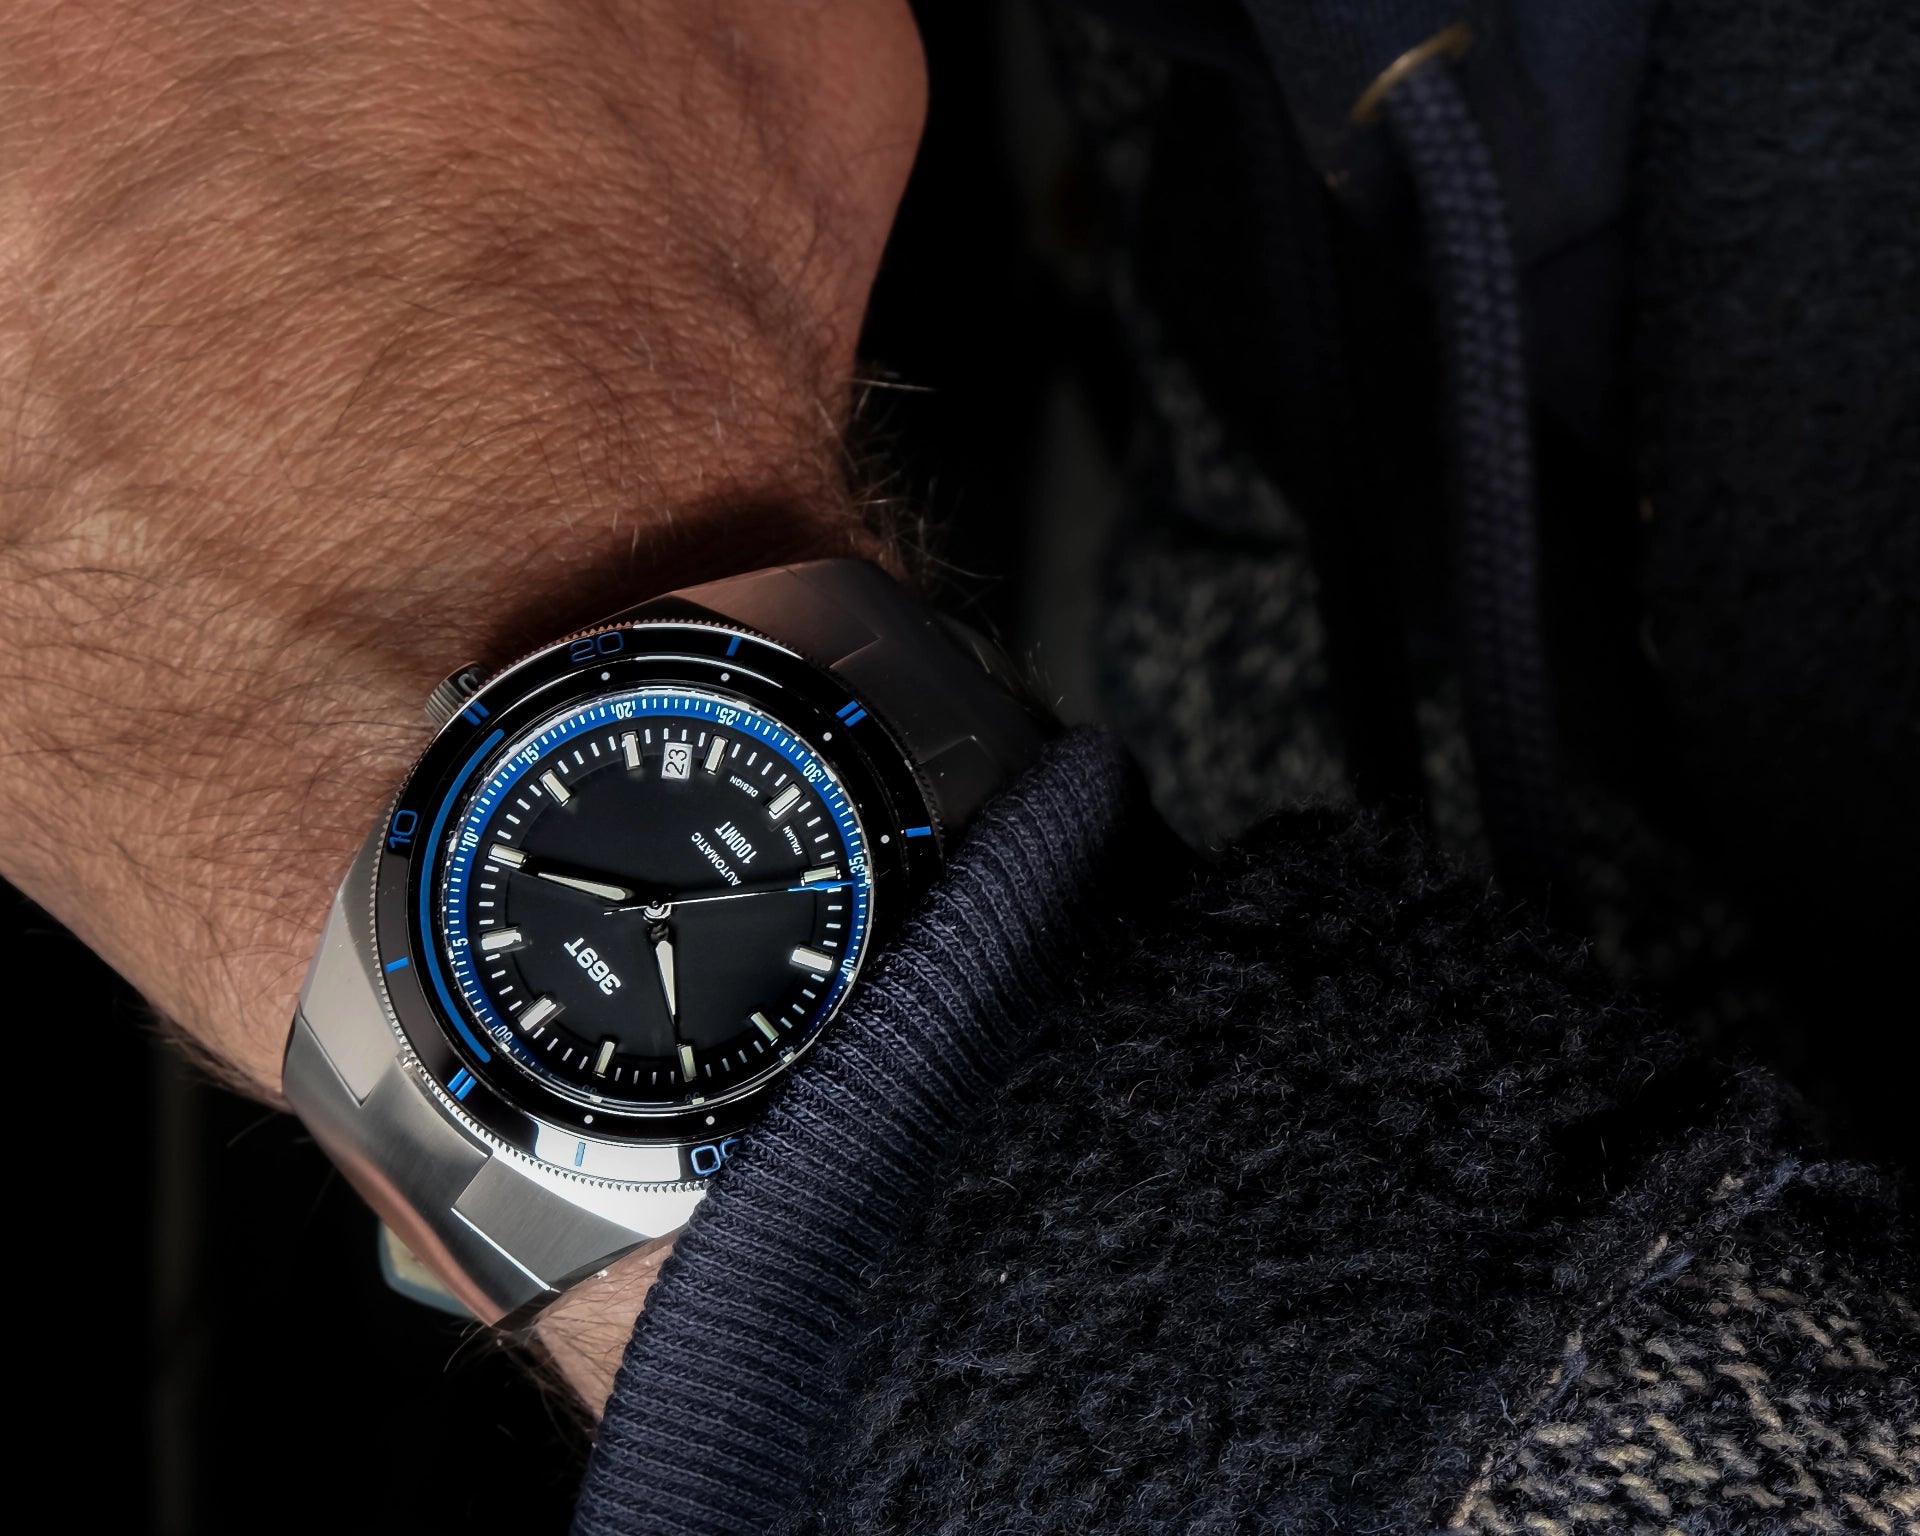 Very cool shot of the blue bezel watch on the wrist